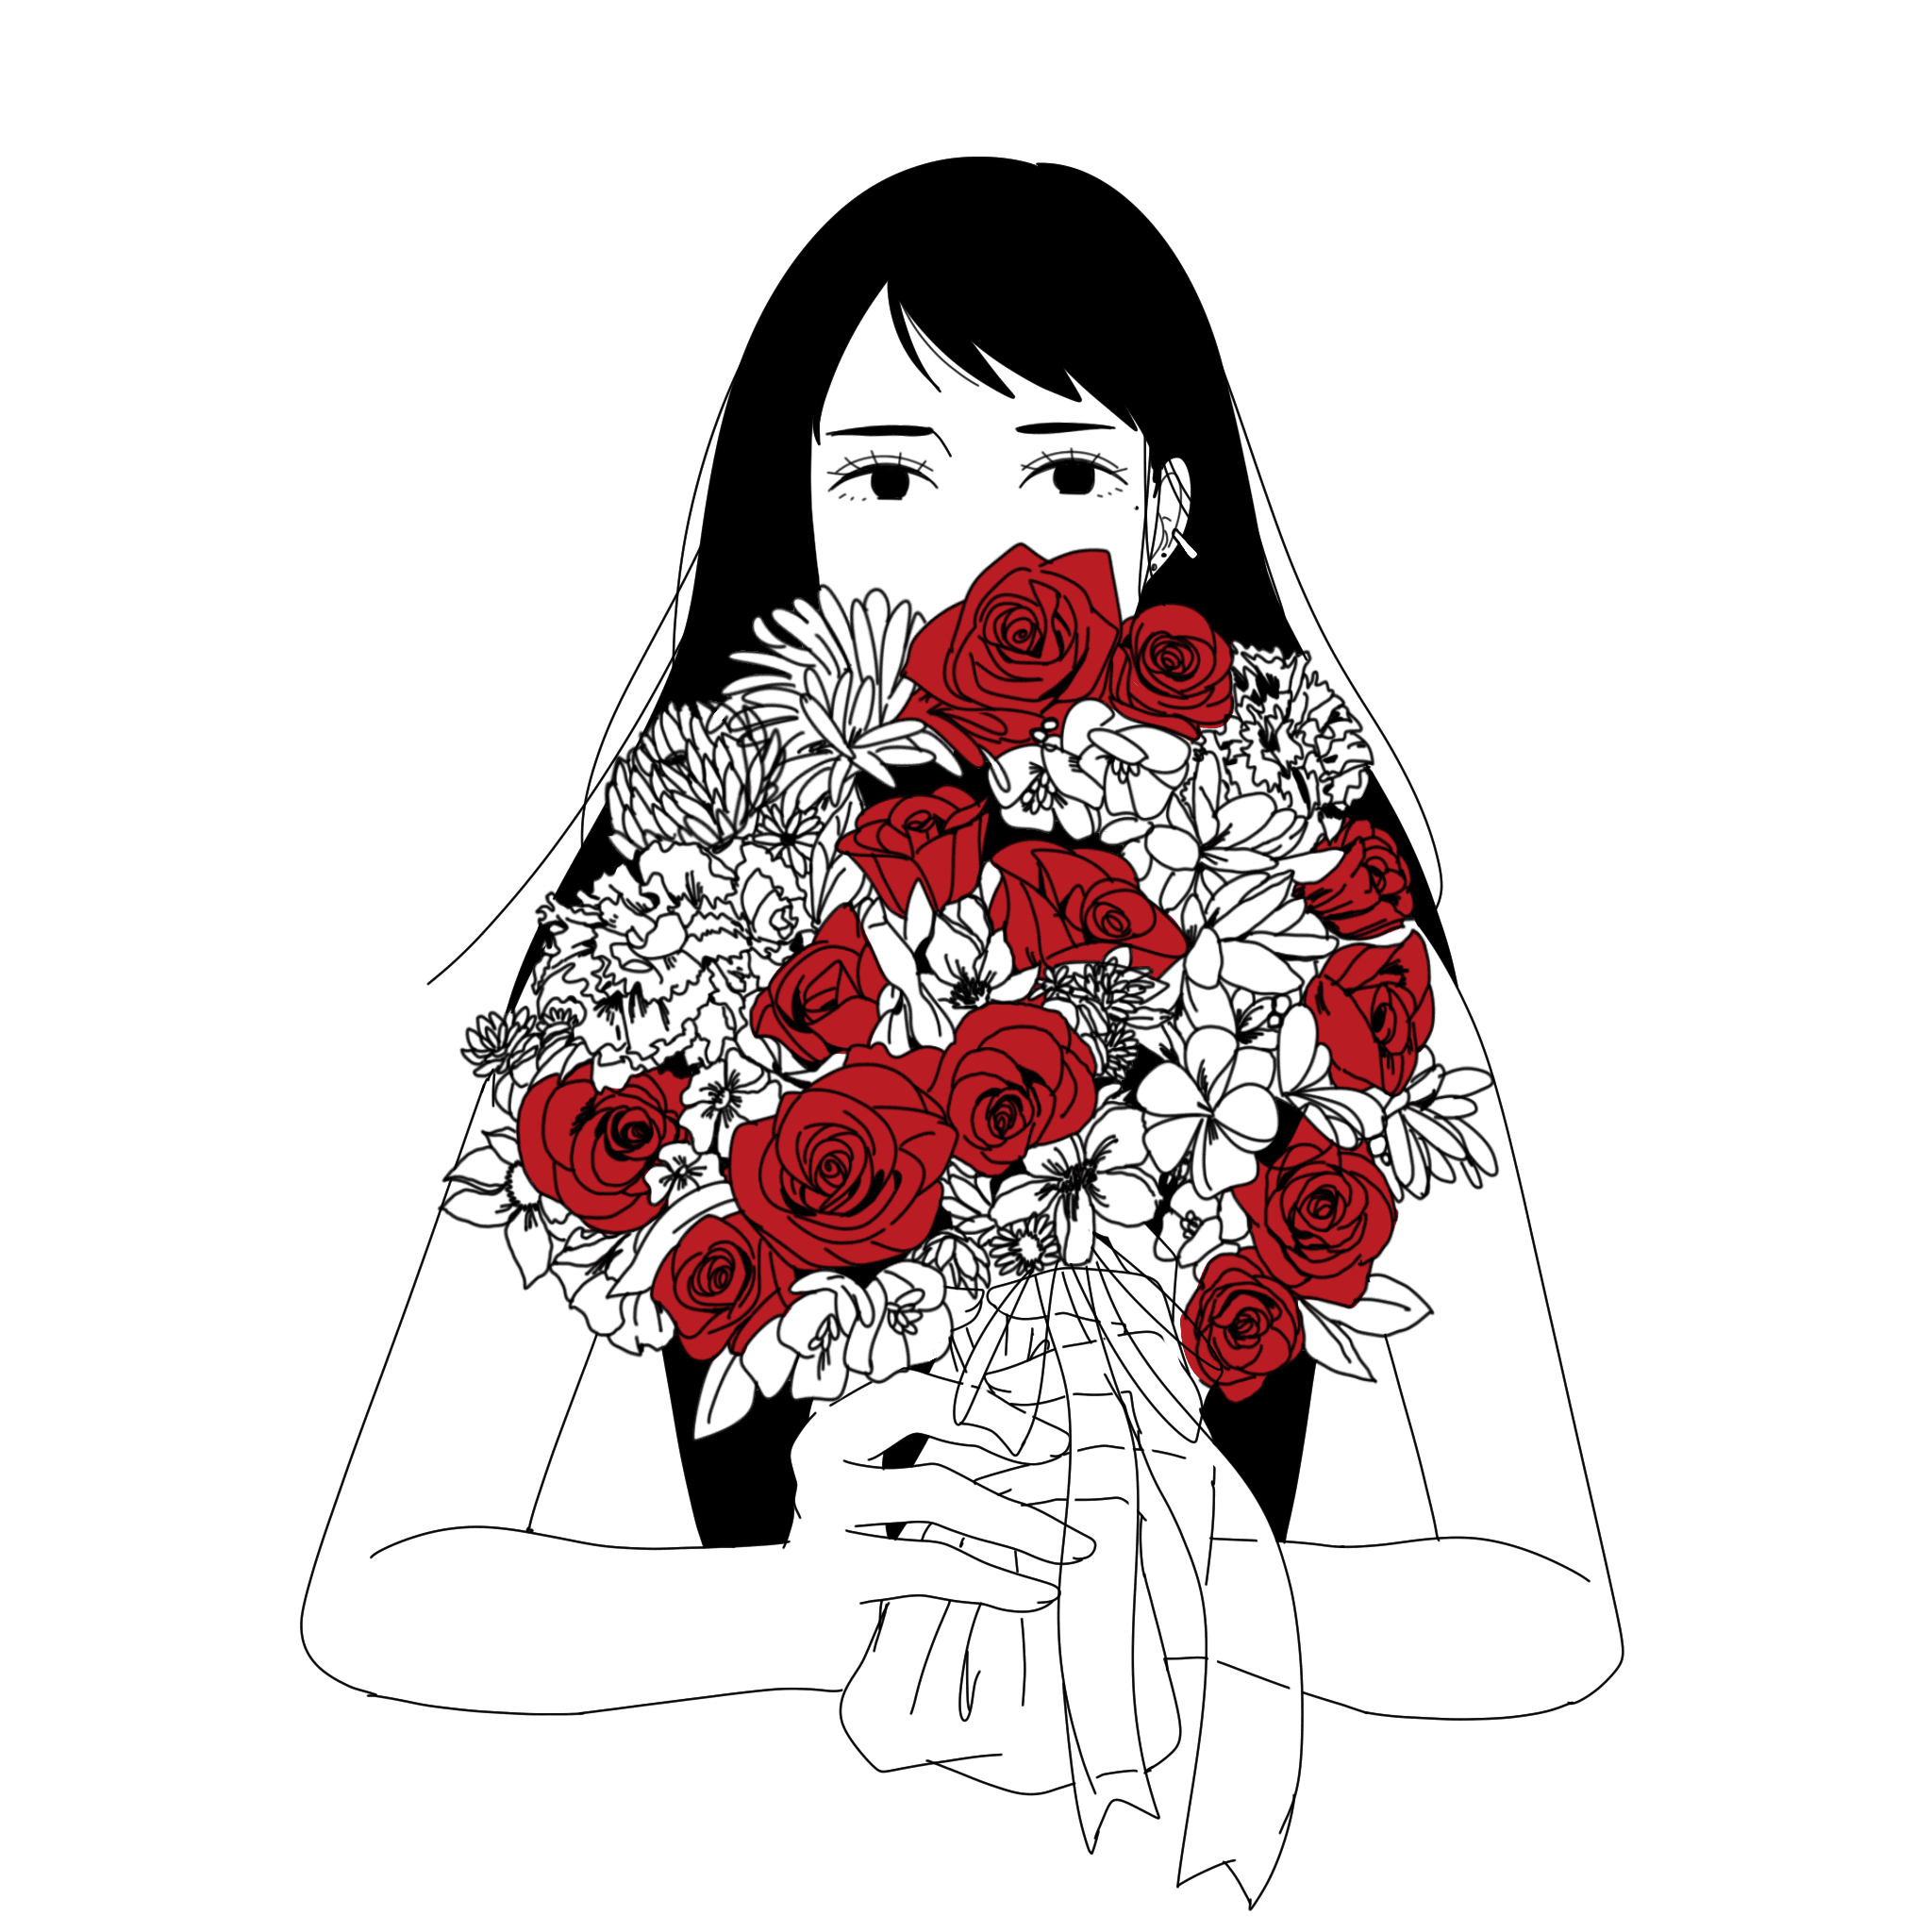 Bouquet and Girl(differently colored)